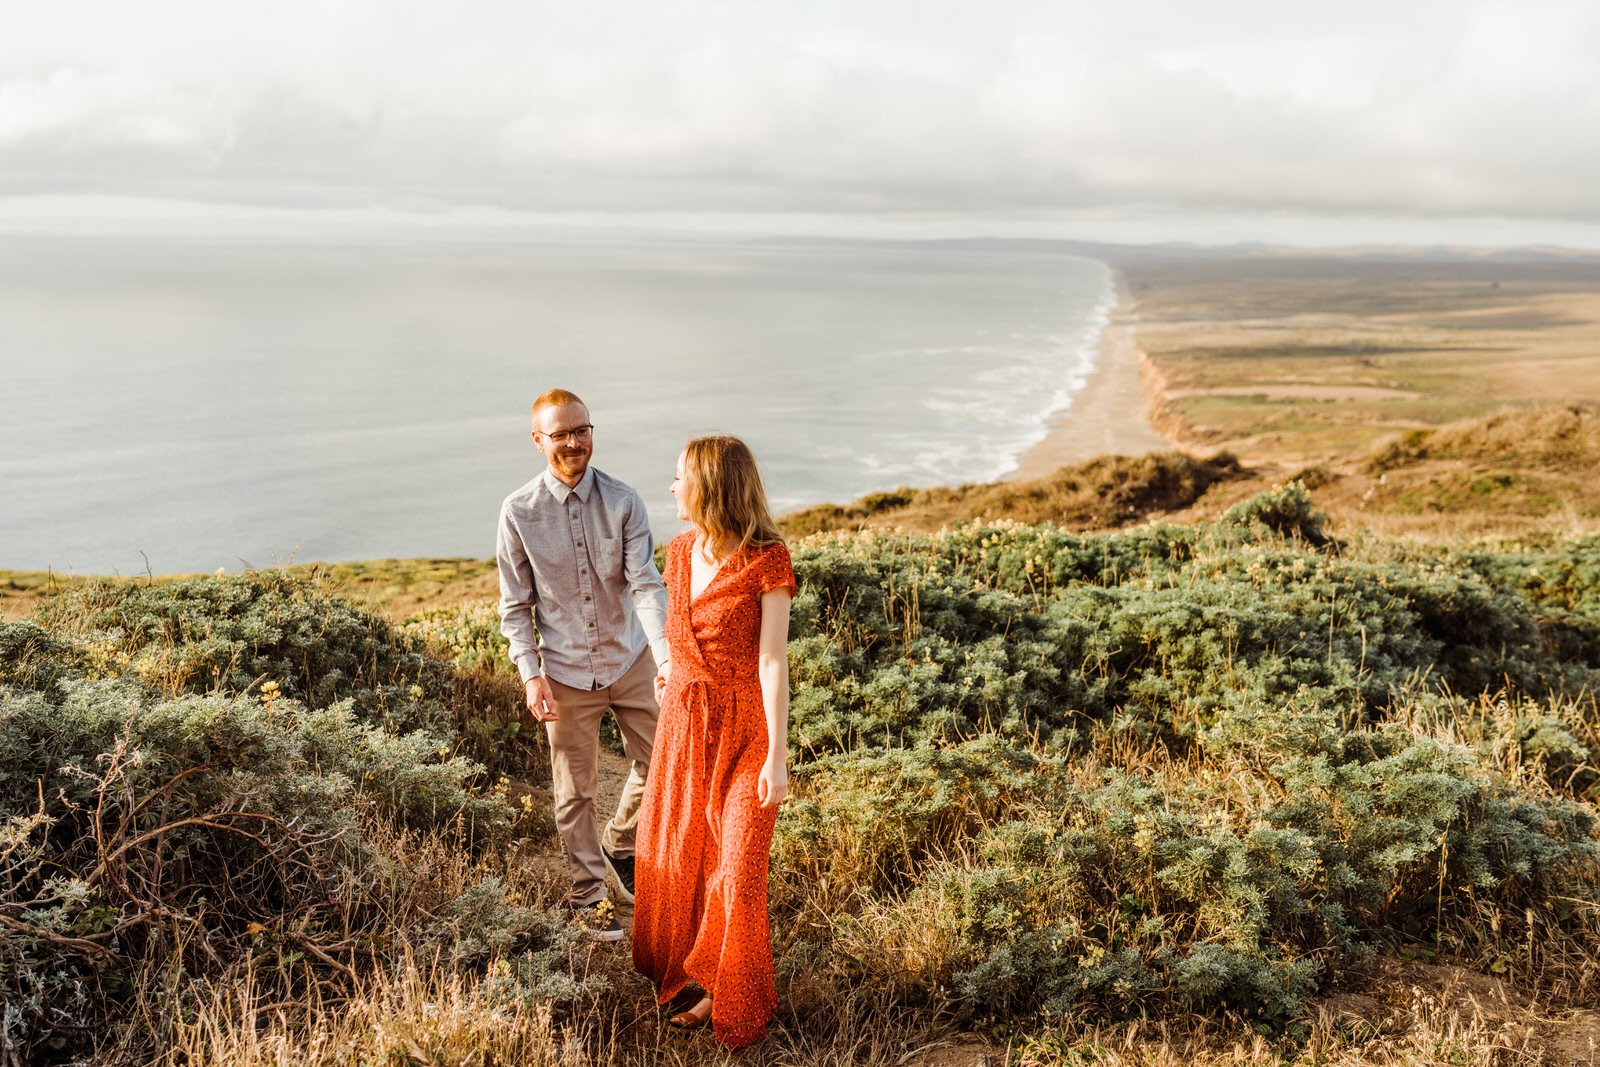 Ireland-inspired Point Reyes engagement | Engagement Outfits | Windy, romantic, adventurous photos | Kept Record | www.keptrecord.com